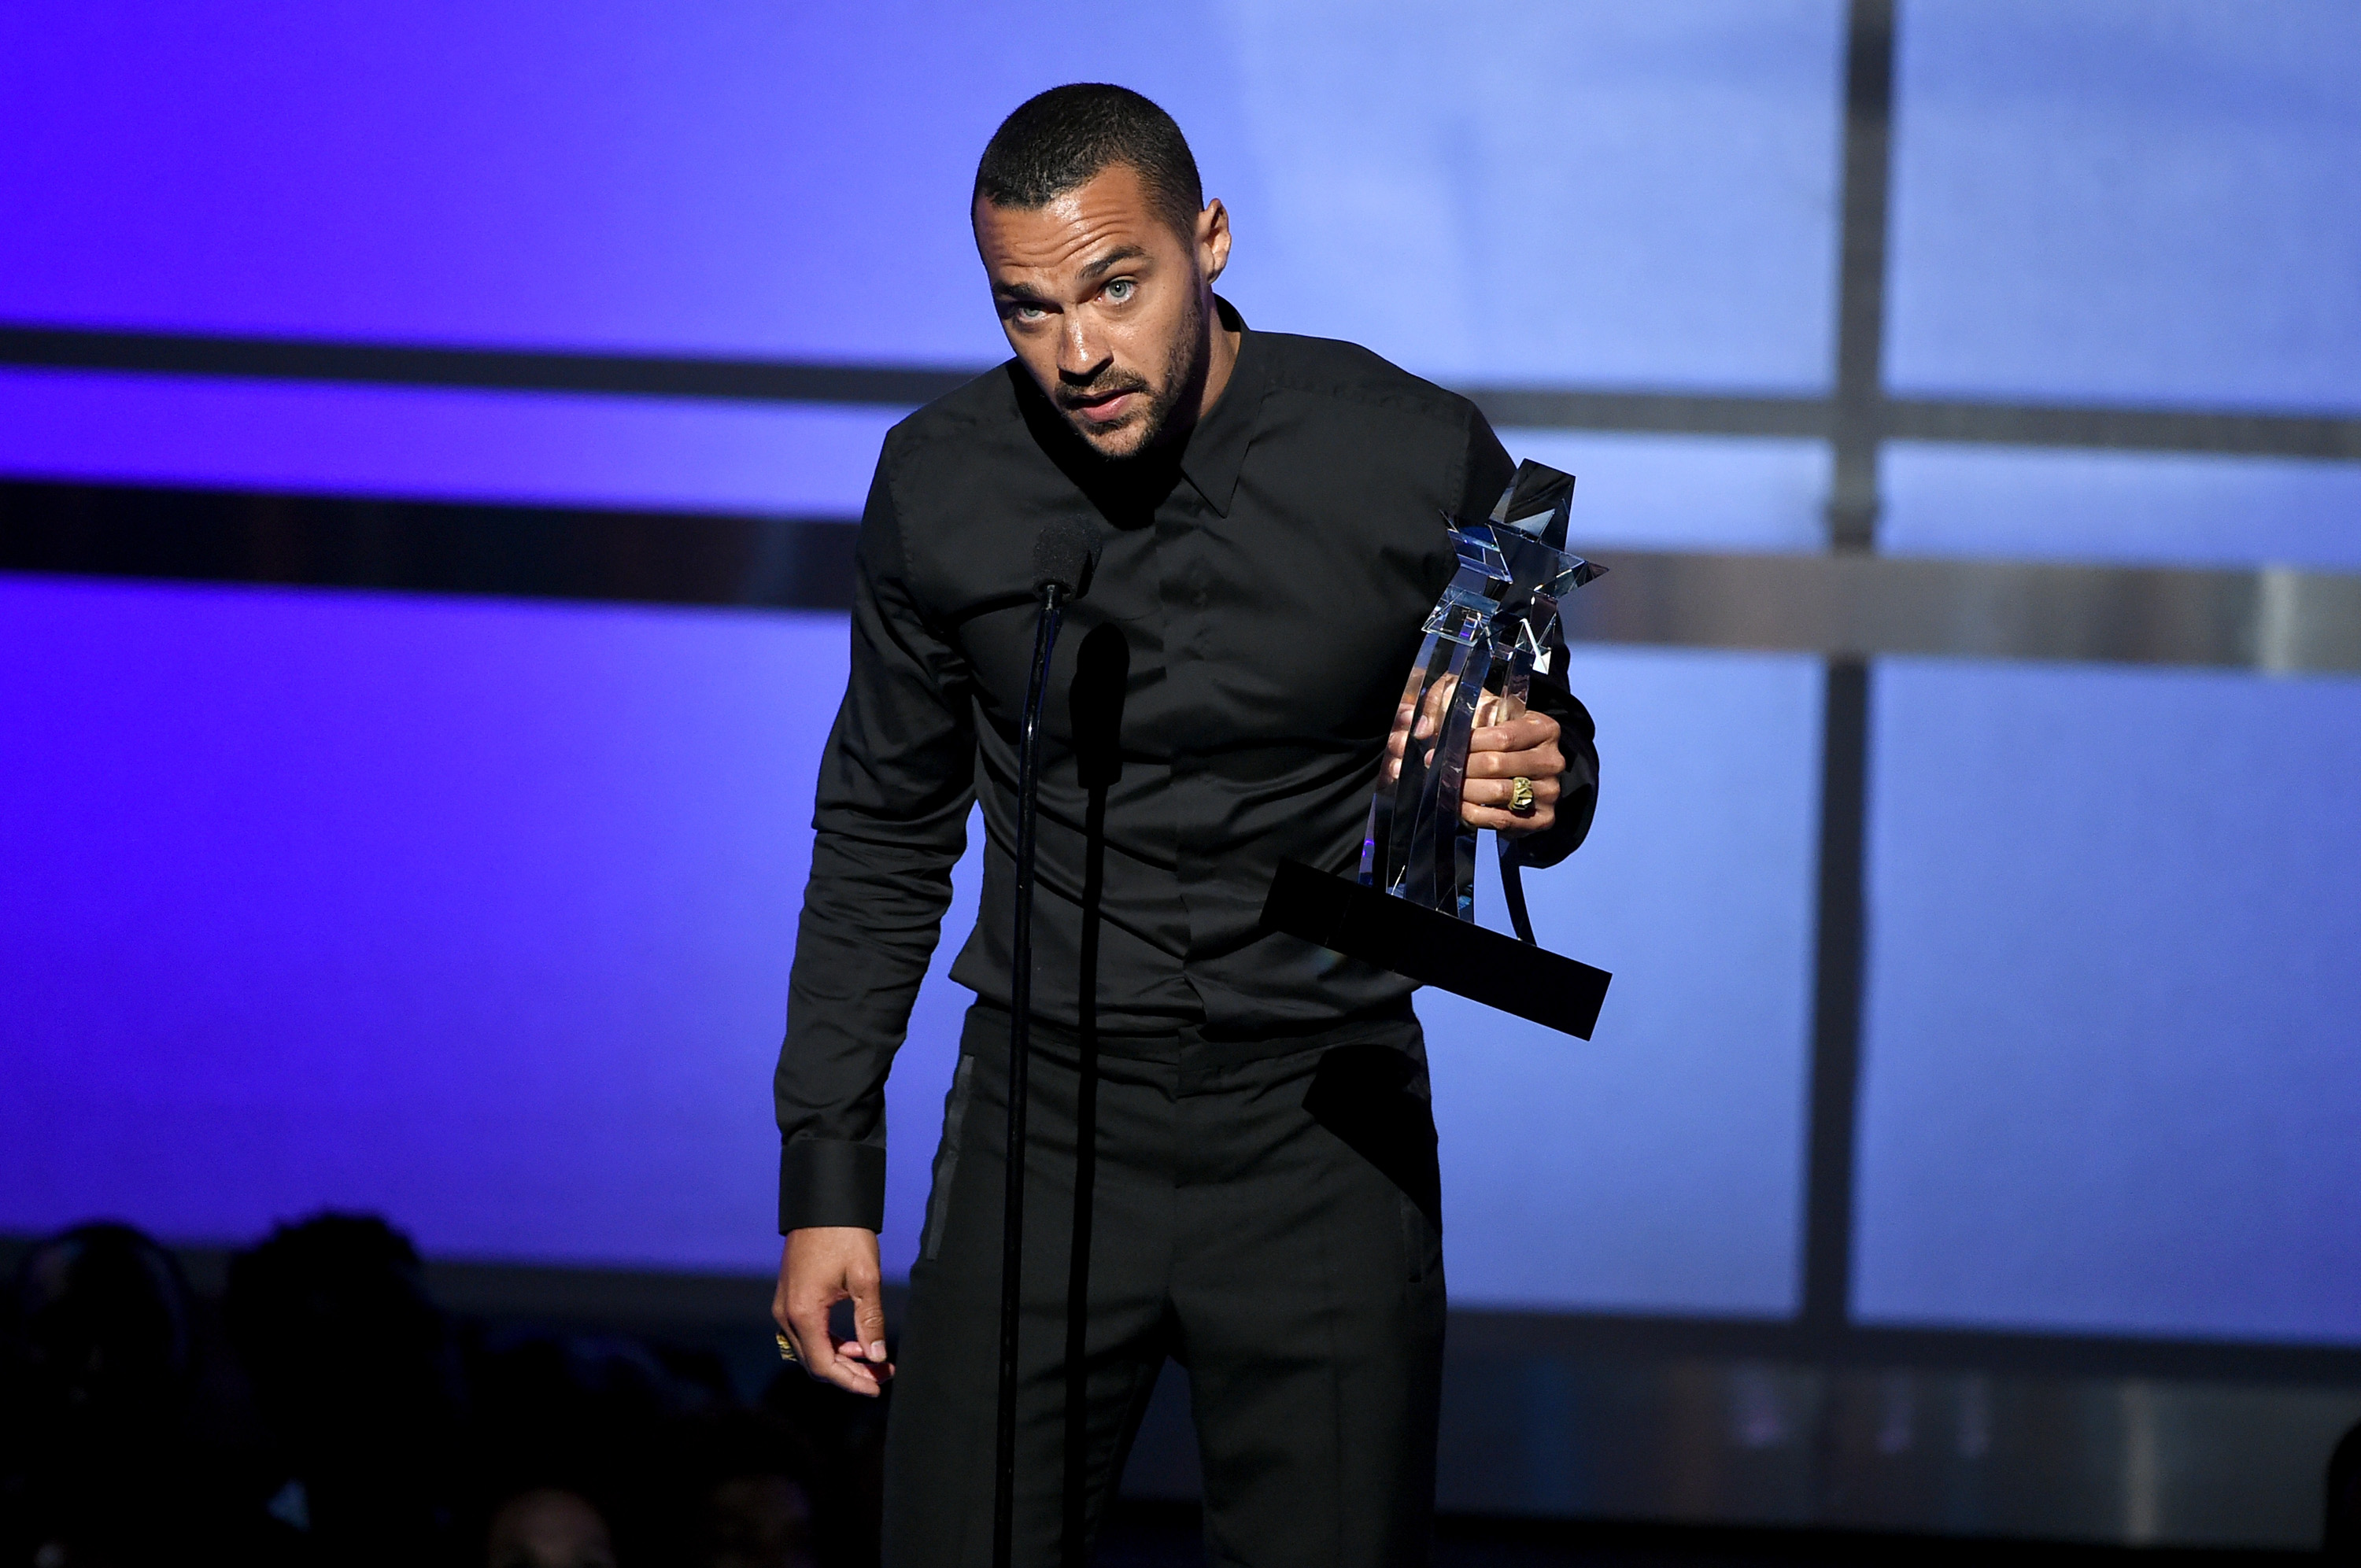 Honoree Jesse Williams accepts the Humanitarian Award onstage during the 2016 BET Awards at the Microsoft Theater on June 26, 2016 in Los Angeles, California. (Kevin Winter/BET—Getty Images for BET)